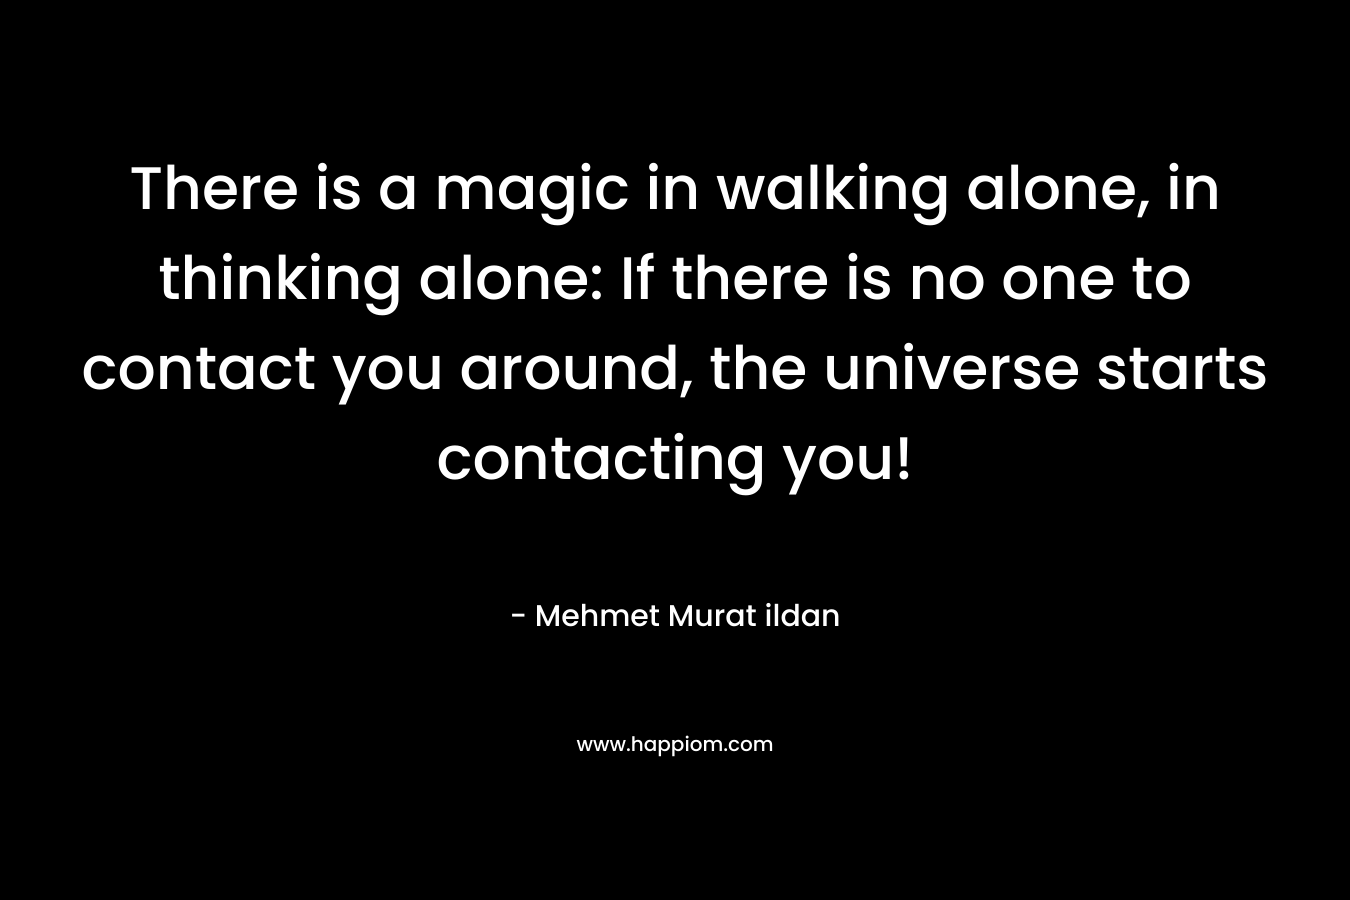 There is a magic in walking alone, in thinking alone: If there is no one to contact you around, the universe starts contacting you!